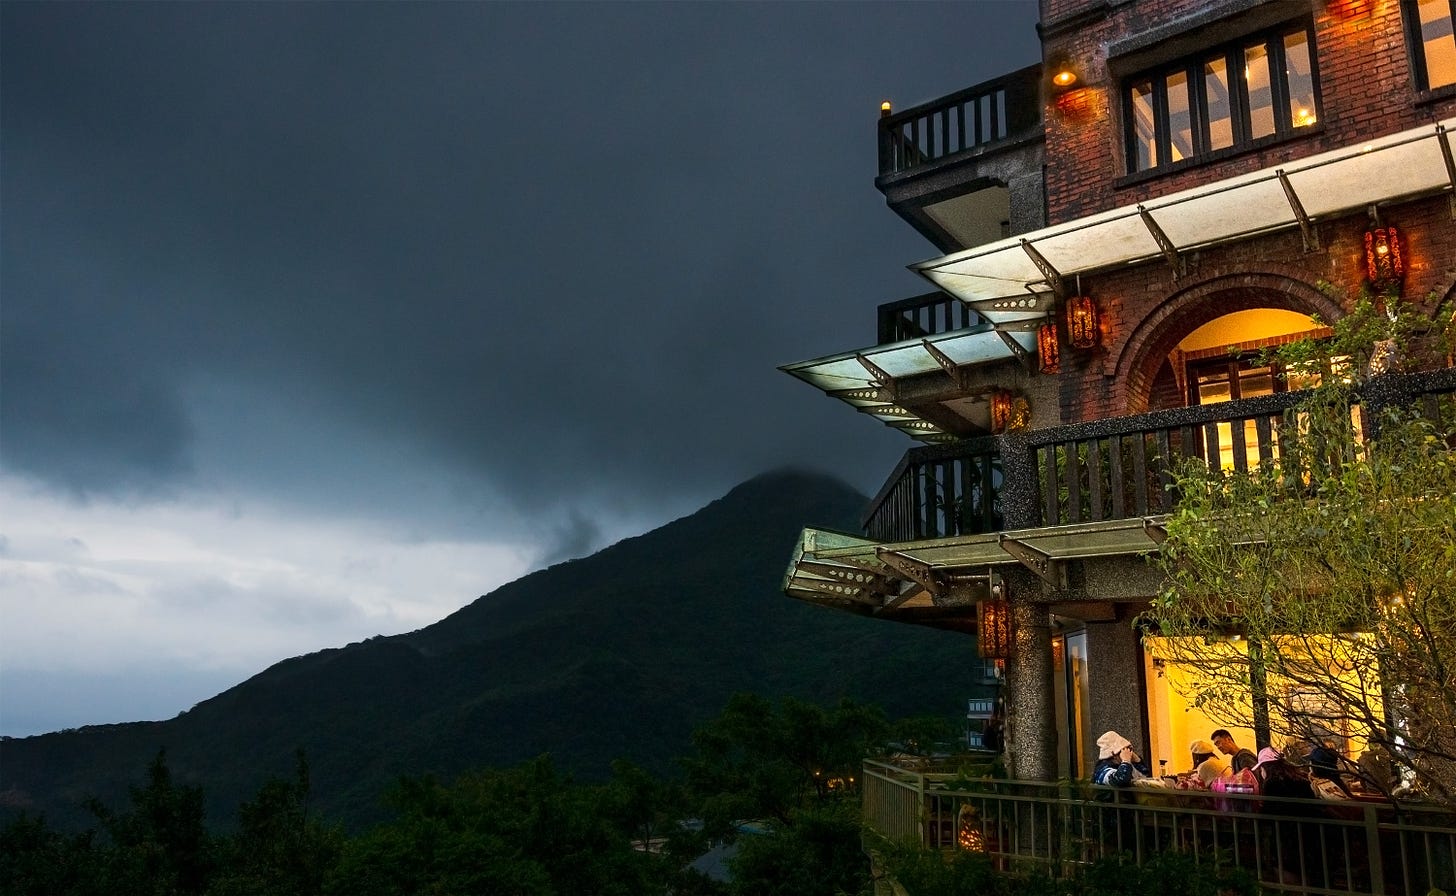 Windows glow under dark clouds hanging low over the mountains at the Artist Teahouse, one of the oldest shops in Jiufen, Taiwan